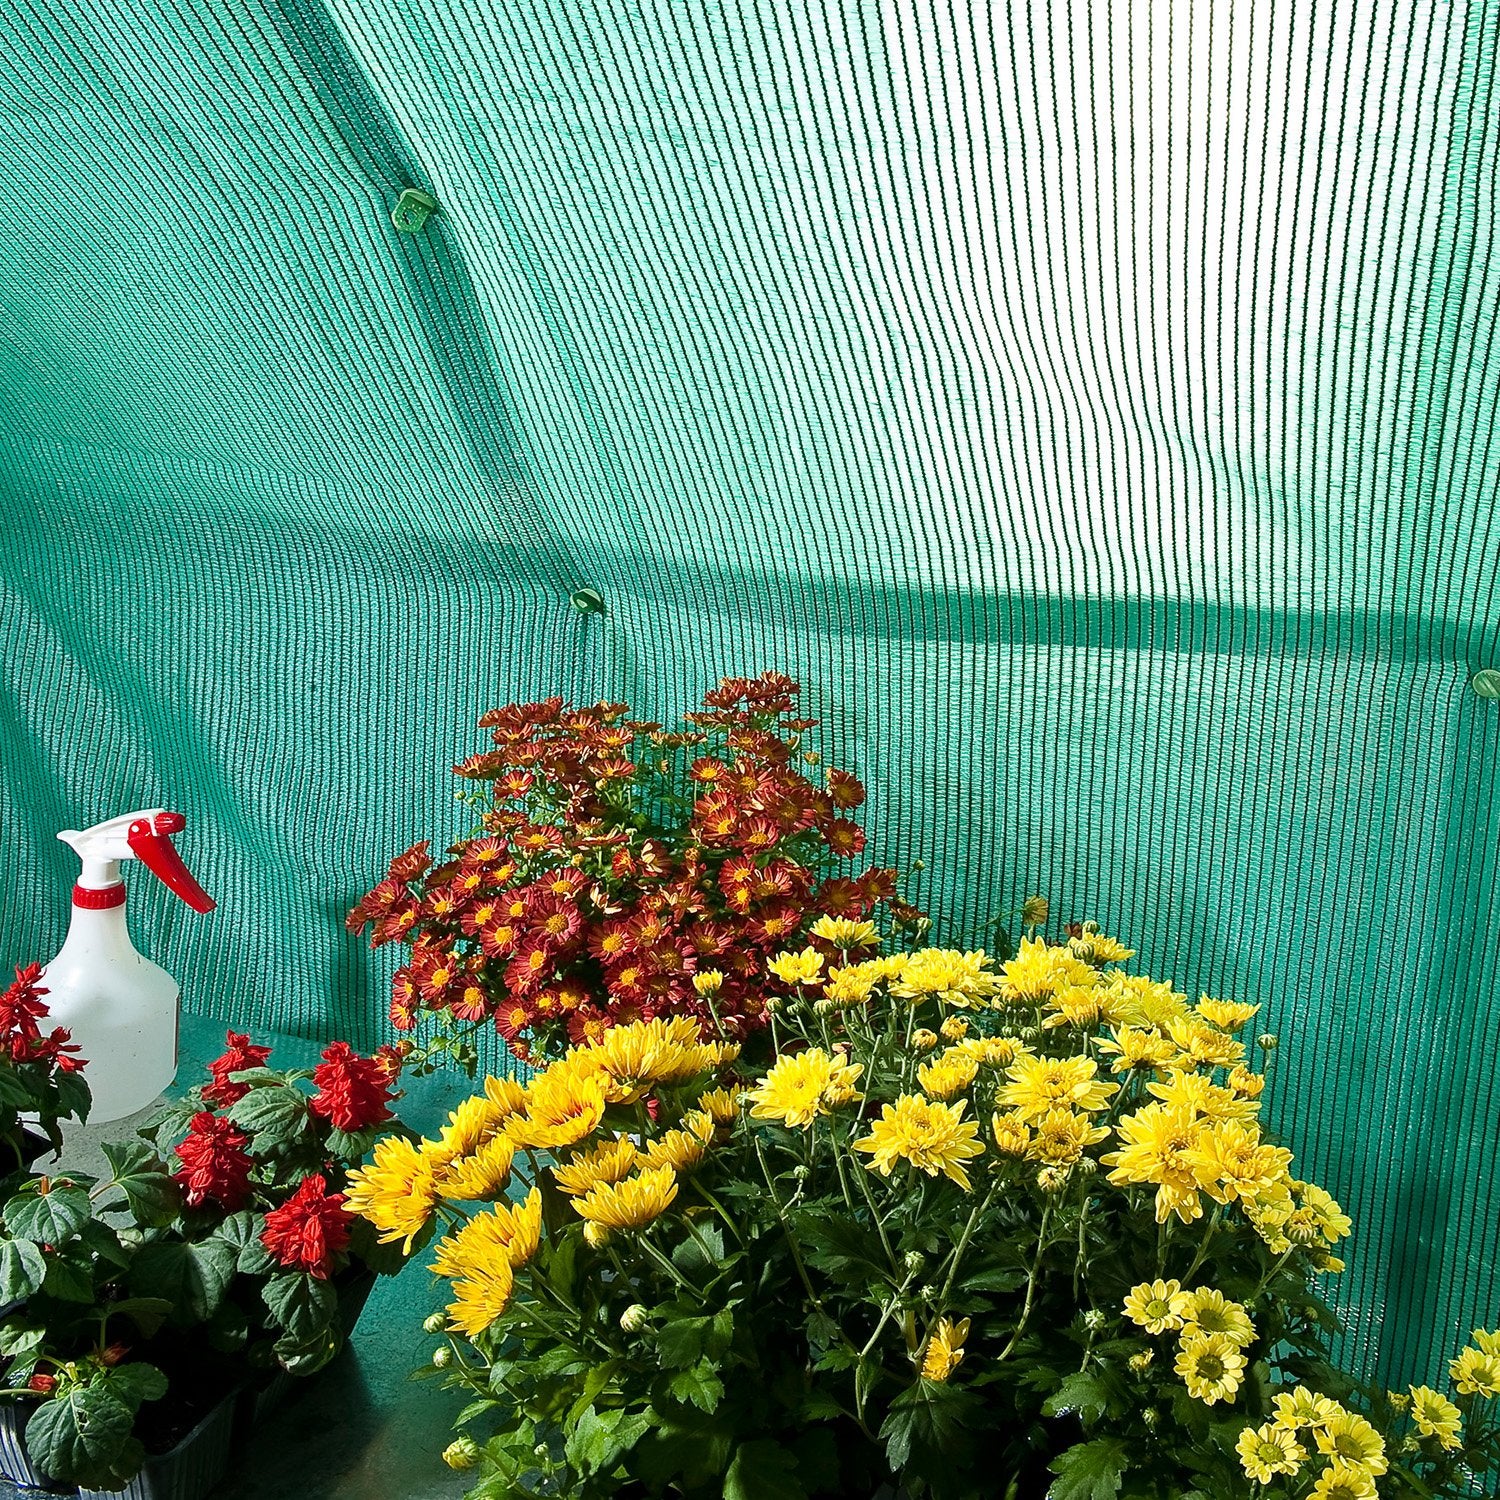 Shade Cloth 8X8 for Palram-Canopia® Greenhouses - Dive To Garden